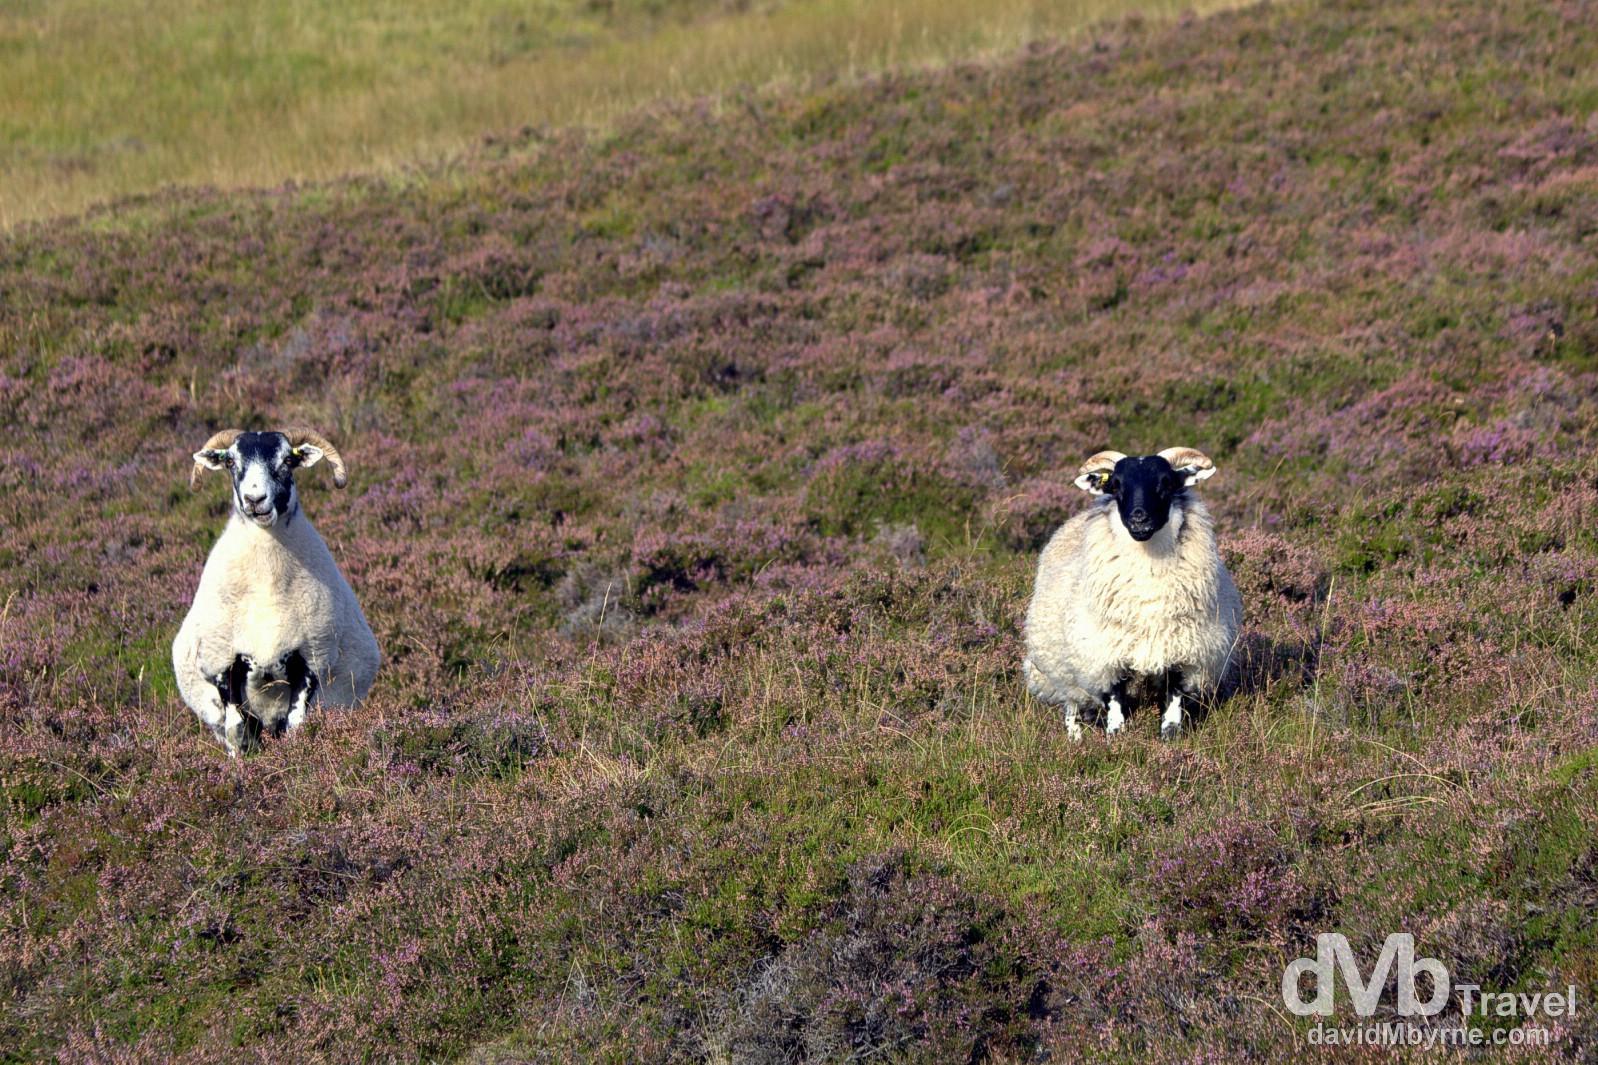 Interested bystanders. Sheep by the side of the road in Cairngorms National Park, Scotland. September 13, 2014.